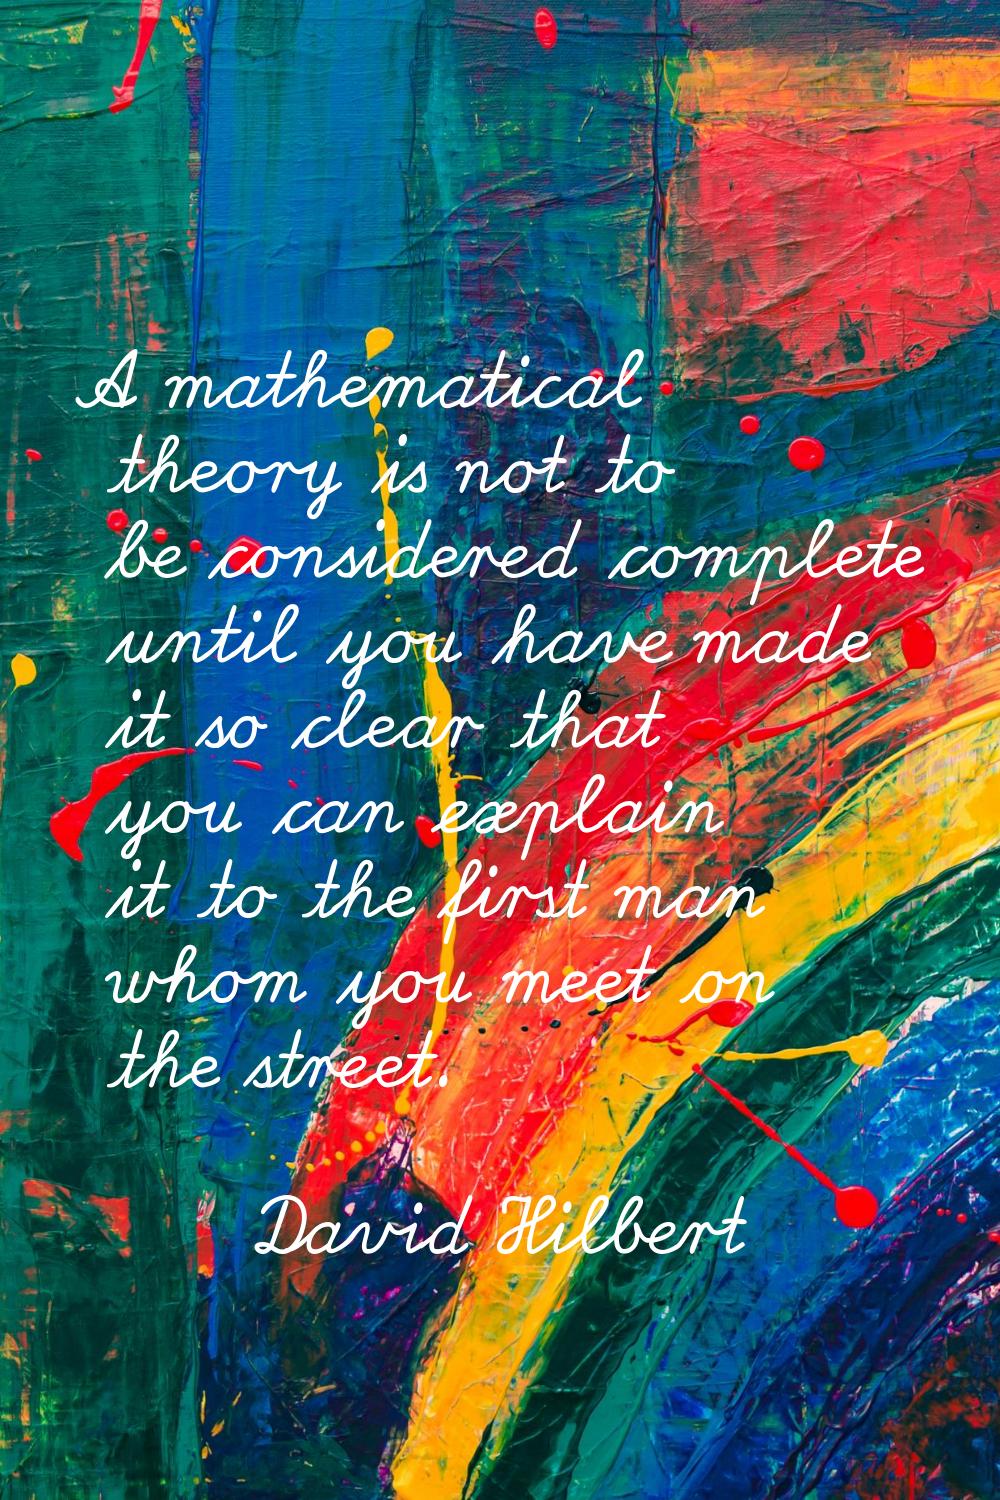 A mathematical theory is not to be considered complete until you have made it so clear that you can